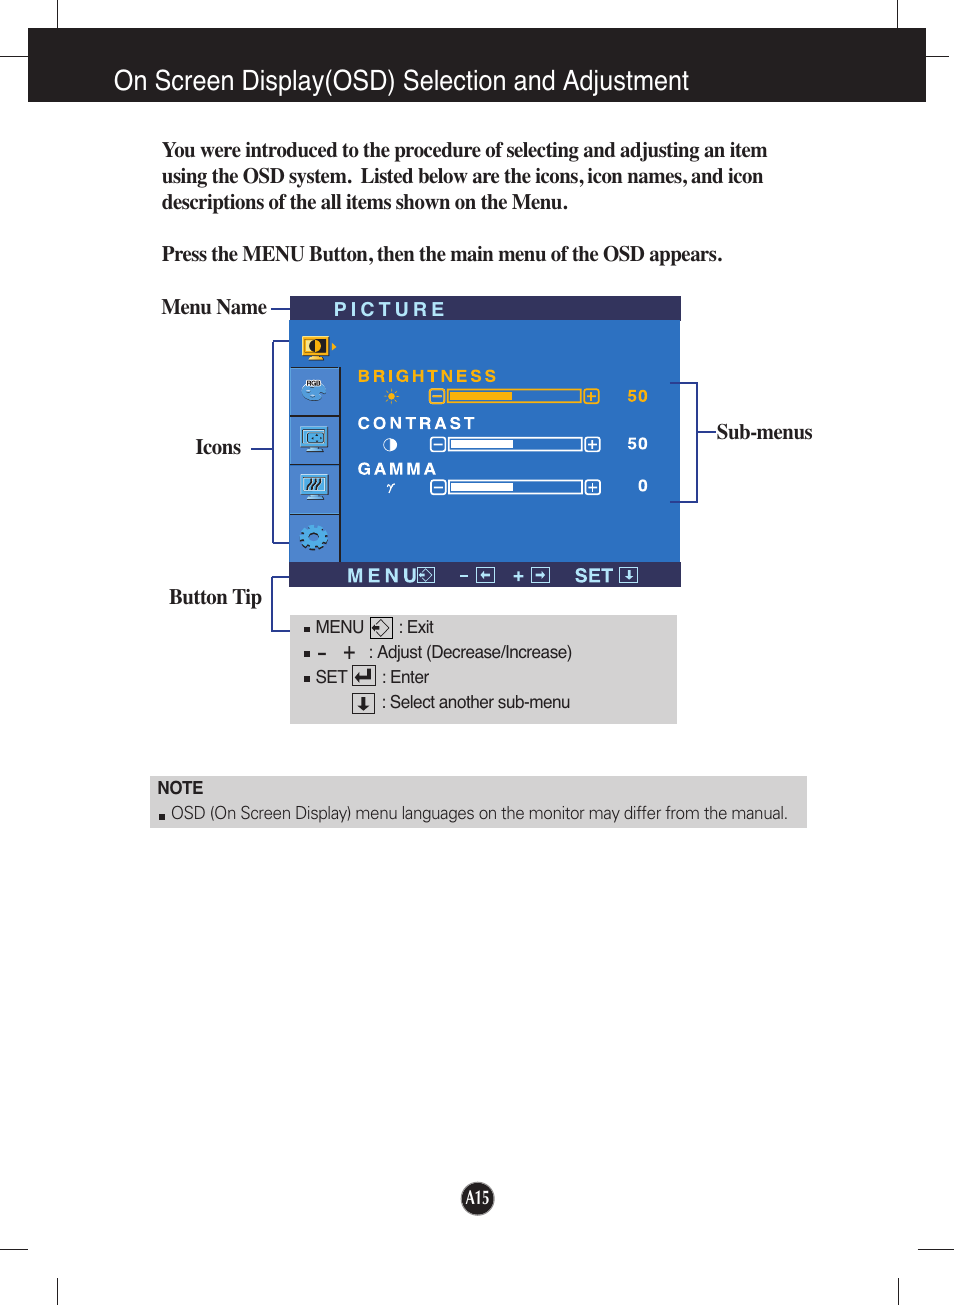 On screen display(osd) selection and adjustment | LG L226WU-PF User Manual | Page 16 / 28